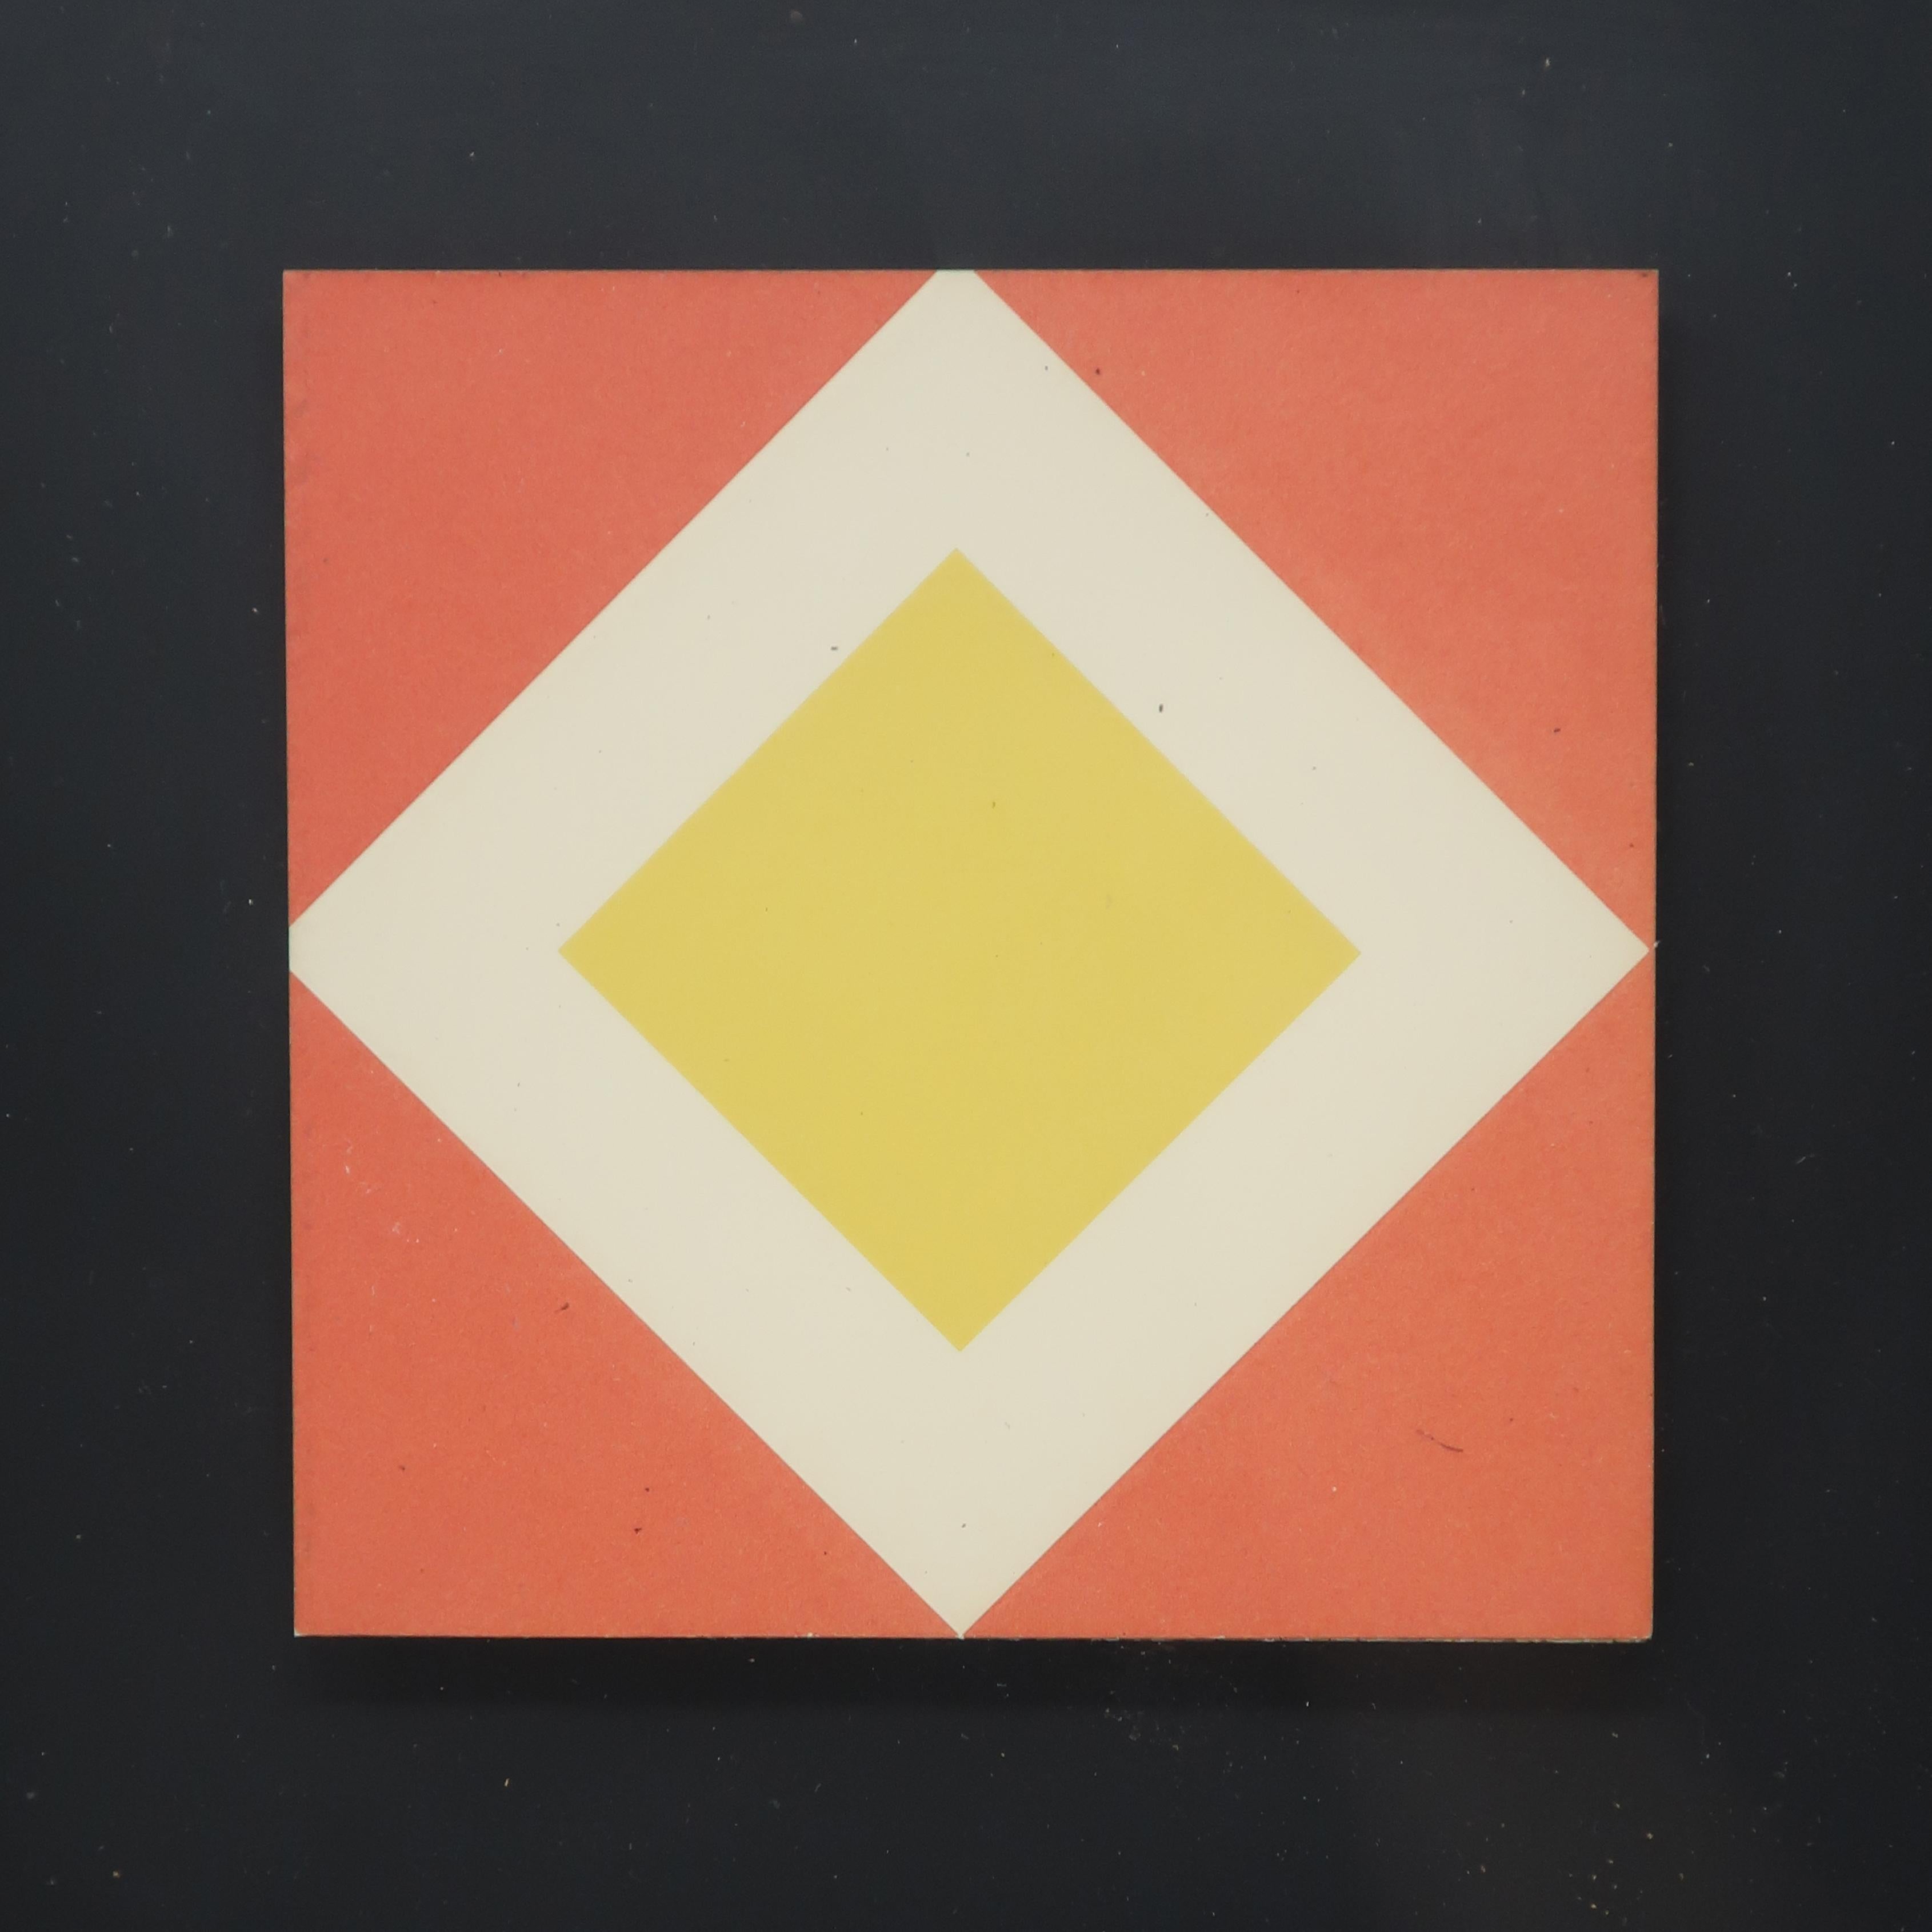 A small framed op art piece with a central yellow and white diamond on an orange background, all of which is raised off a black background. Behind glass in a brass colored aluminum frame with original turner wall accessories label.

Measures: 10”